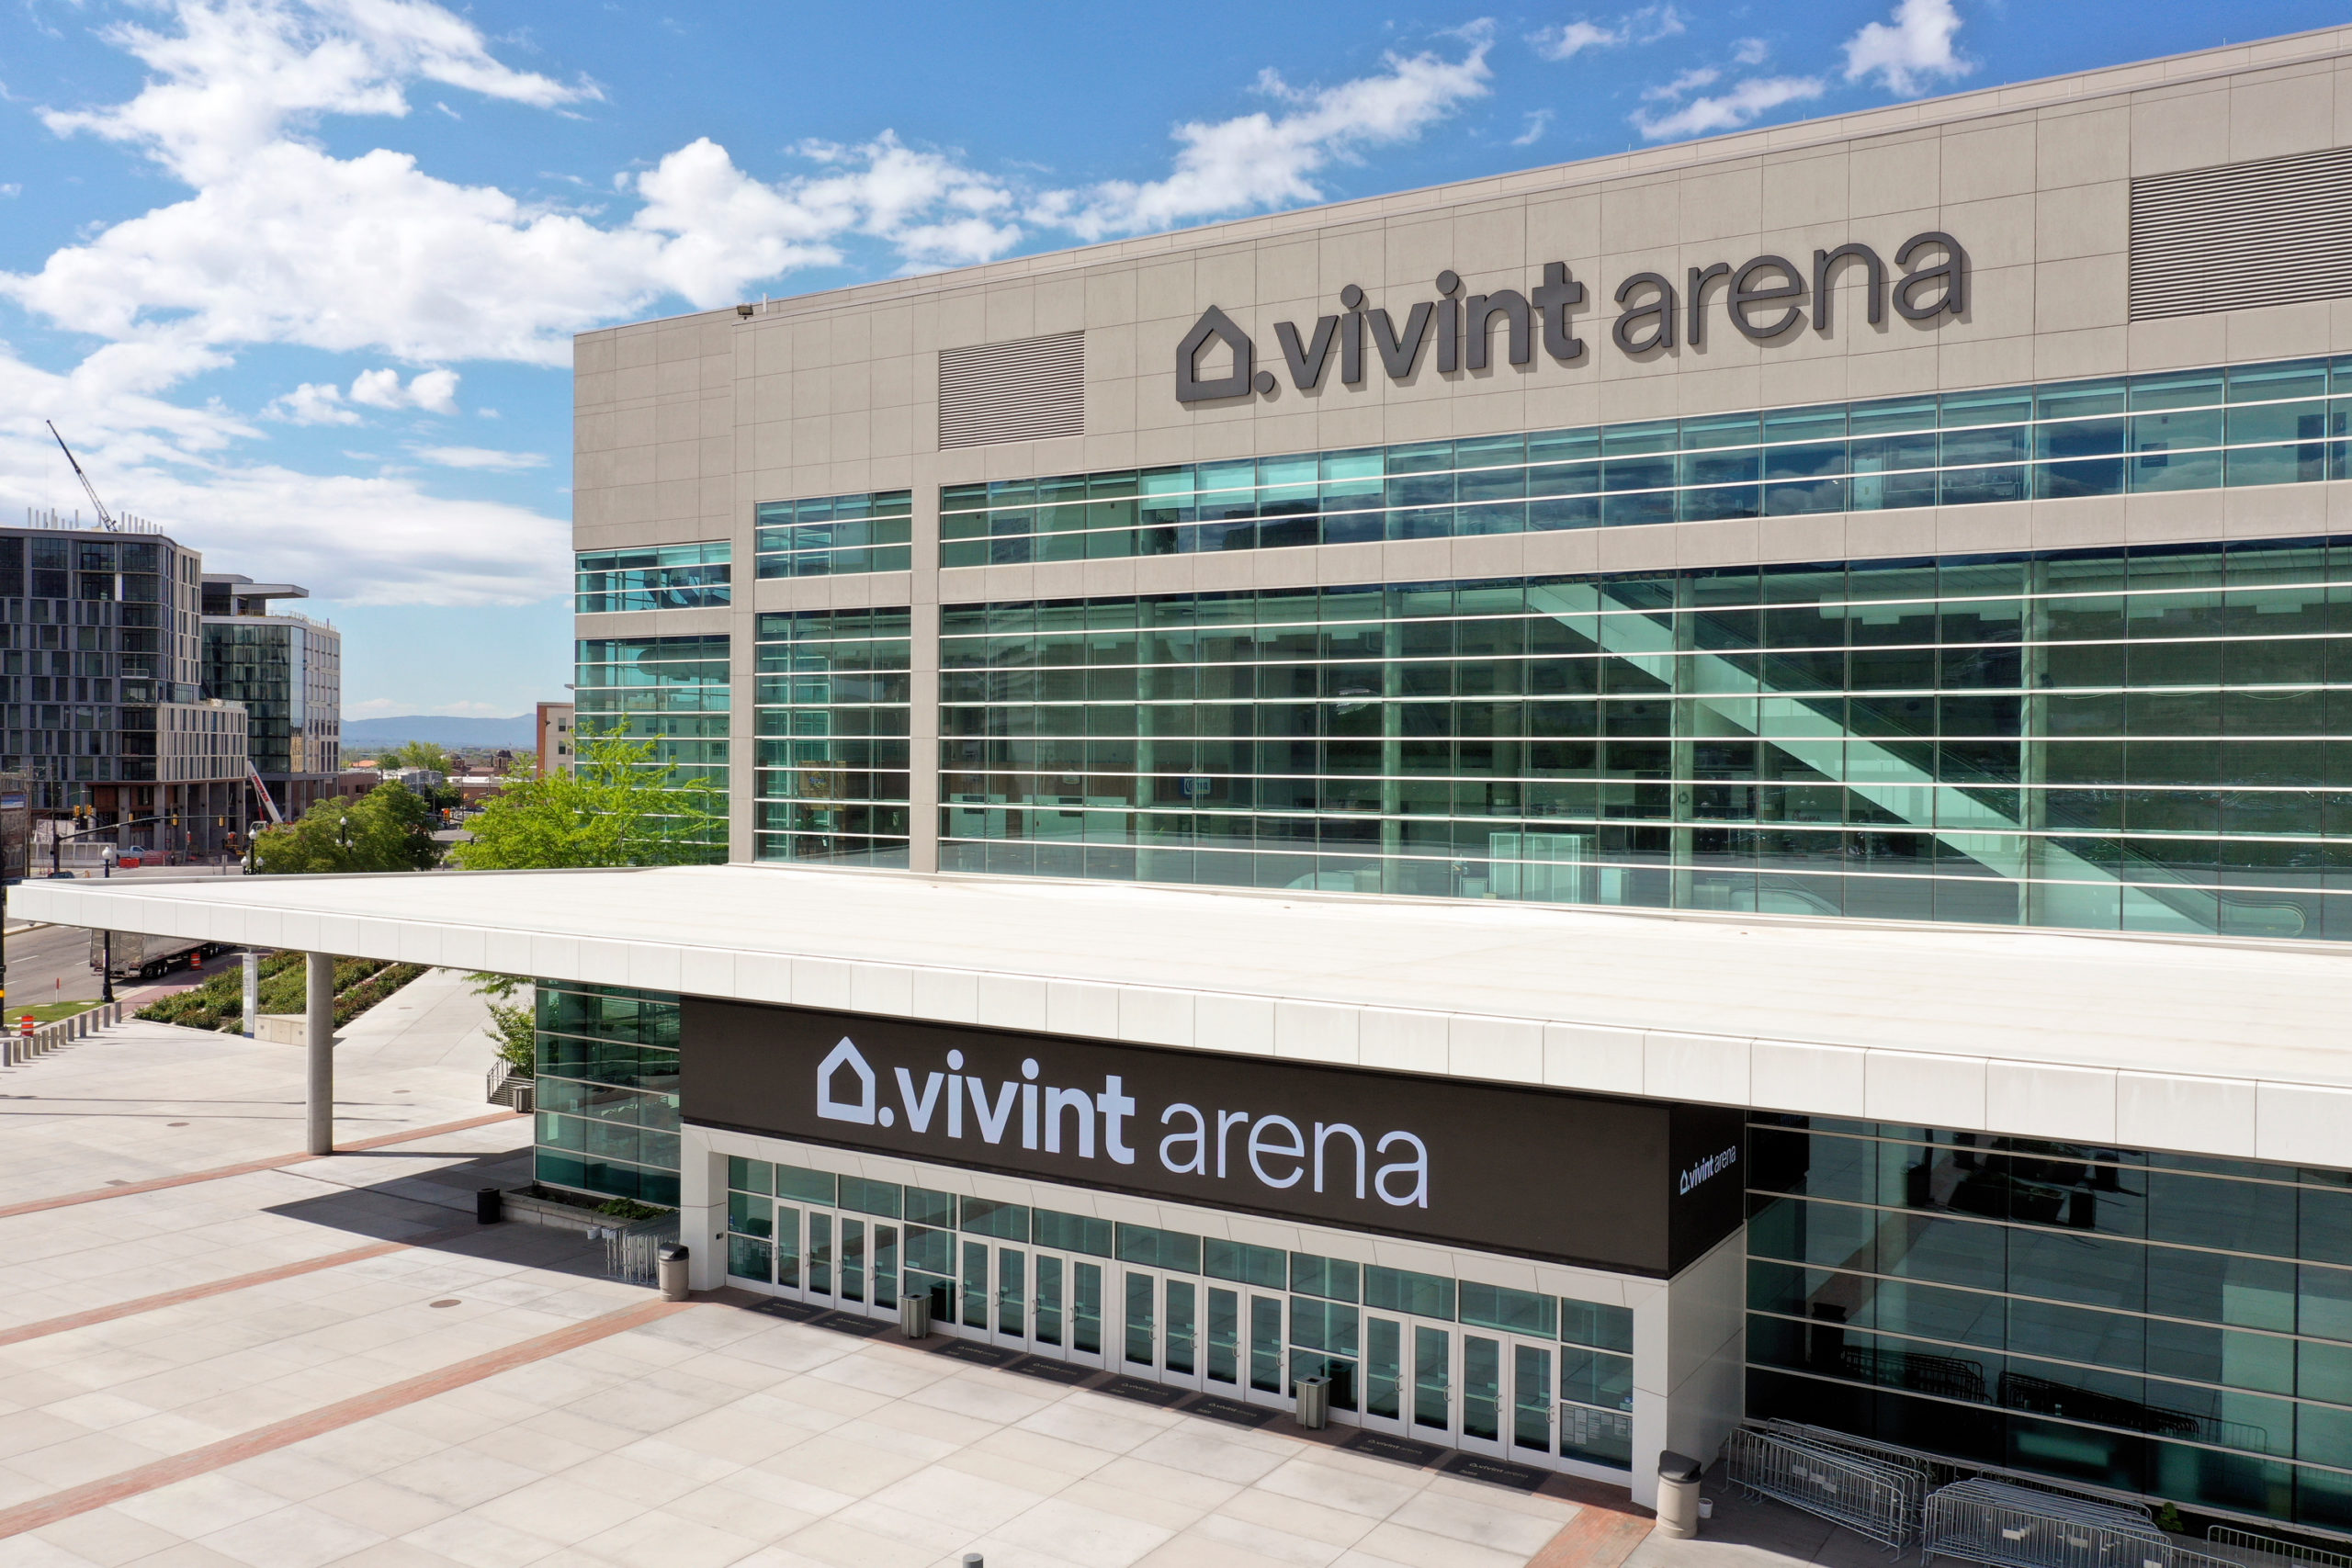 FILE: The Vivint Arena in Salt Lake City is pictured on Tuesday, May 24, 2022. (Kristin Murphy, Des...